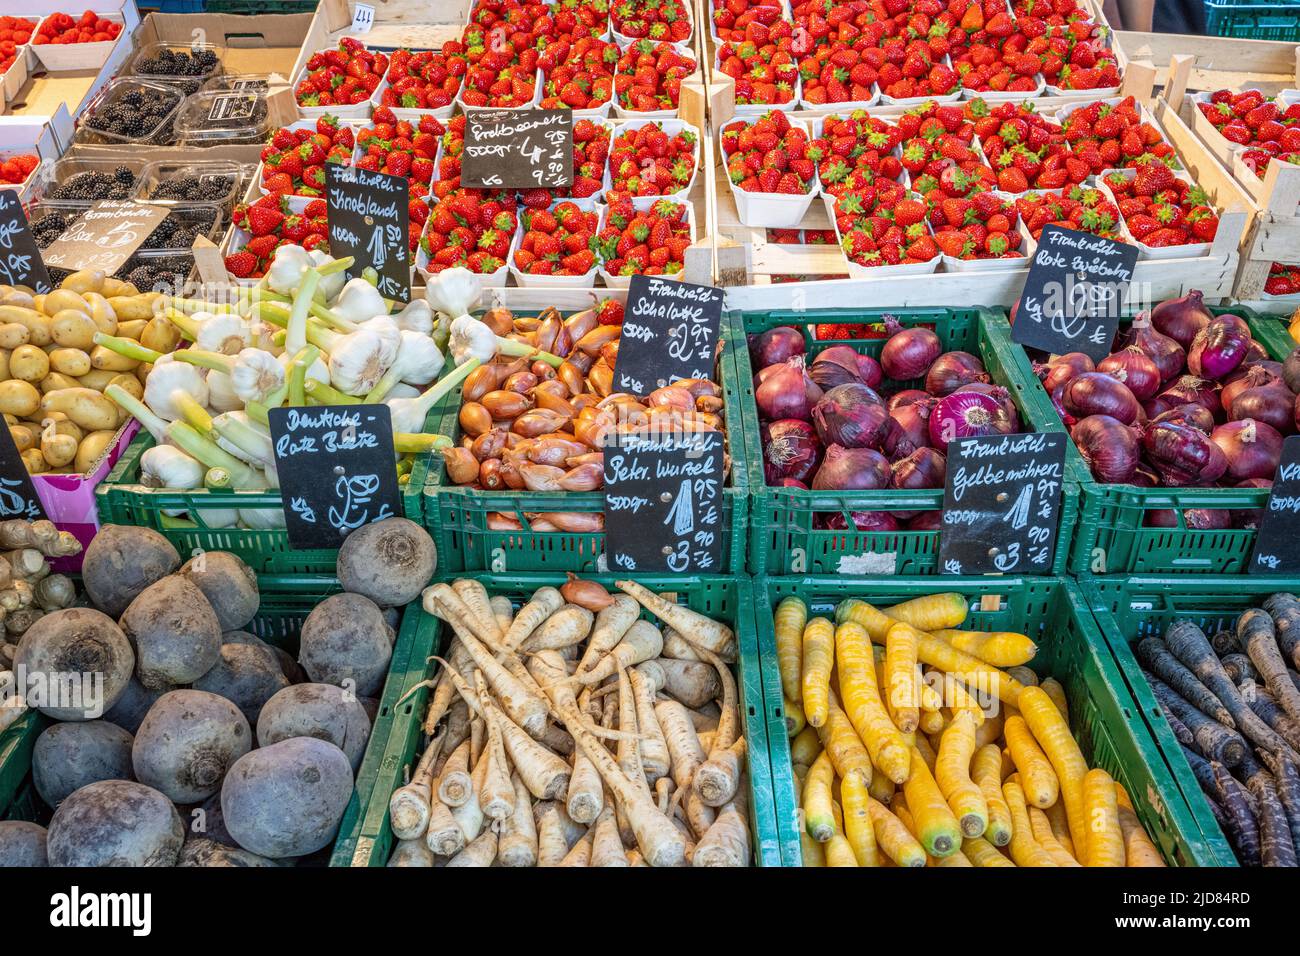 Vegetables and strawberries for sale at a market Stock Photo